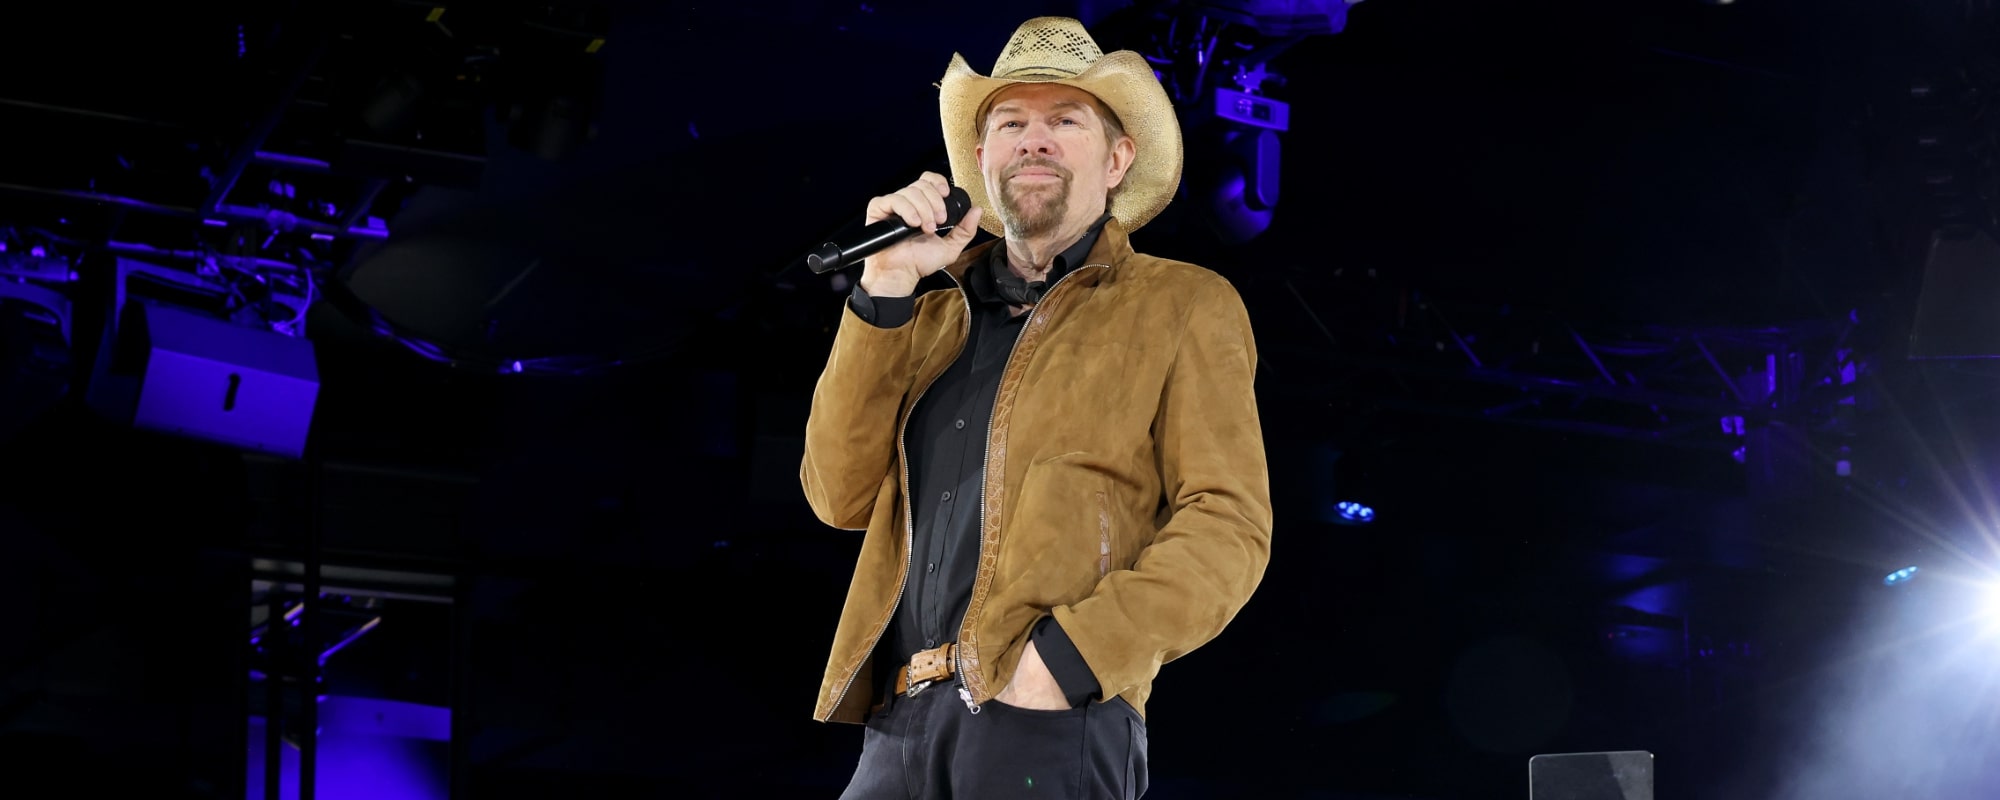 Toby Keith & Luke Combs Make “Ships That Don’t Come In” One of the Heaviest Moments on HARDY’s Joe Diffie Tribute Project